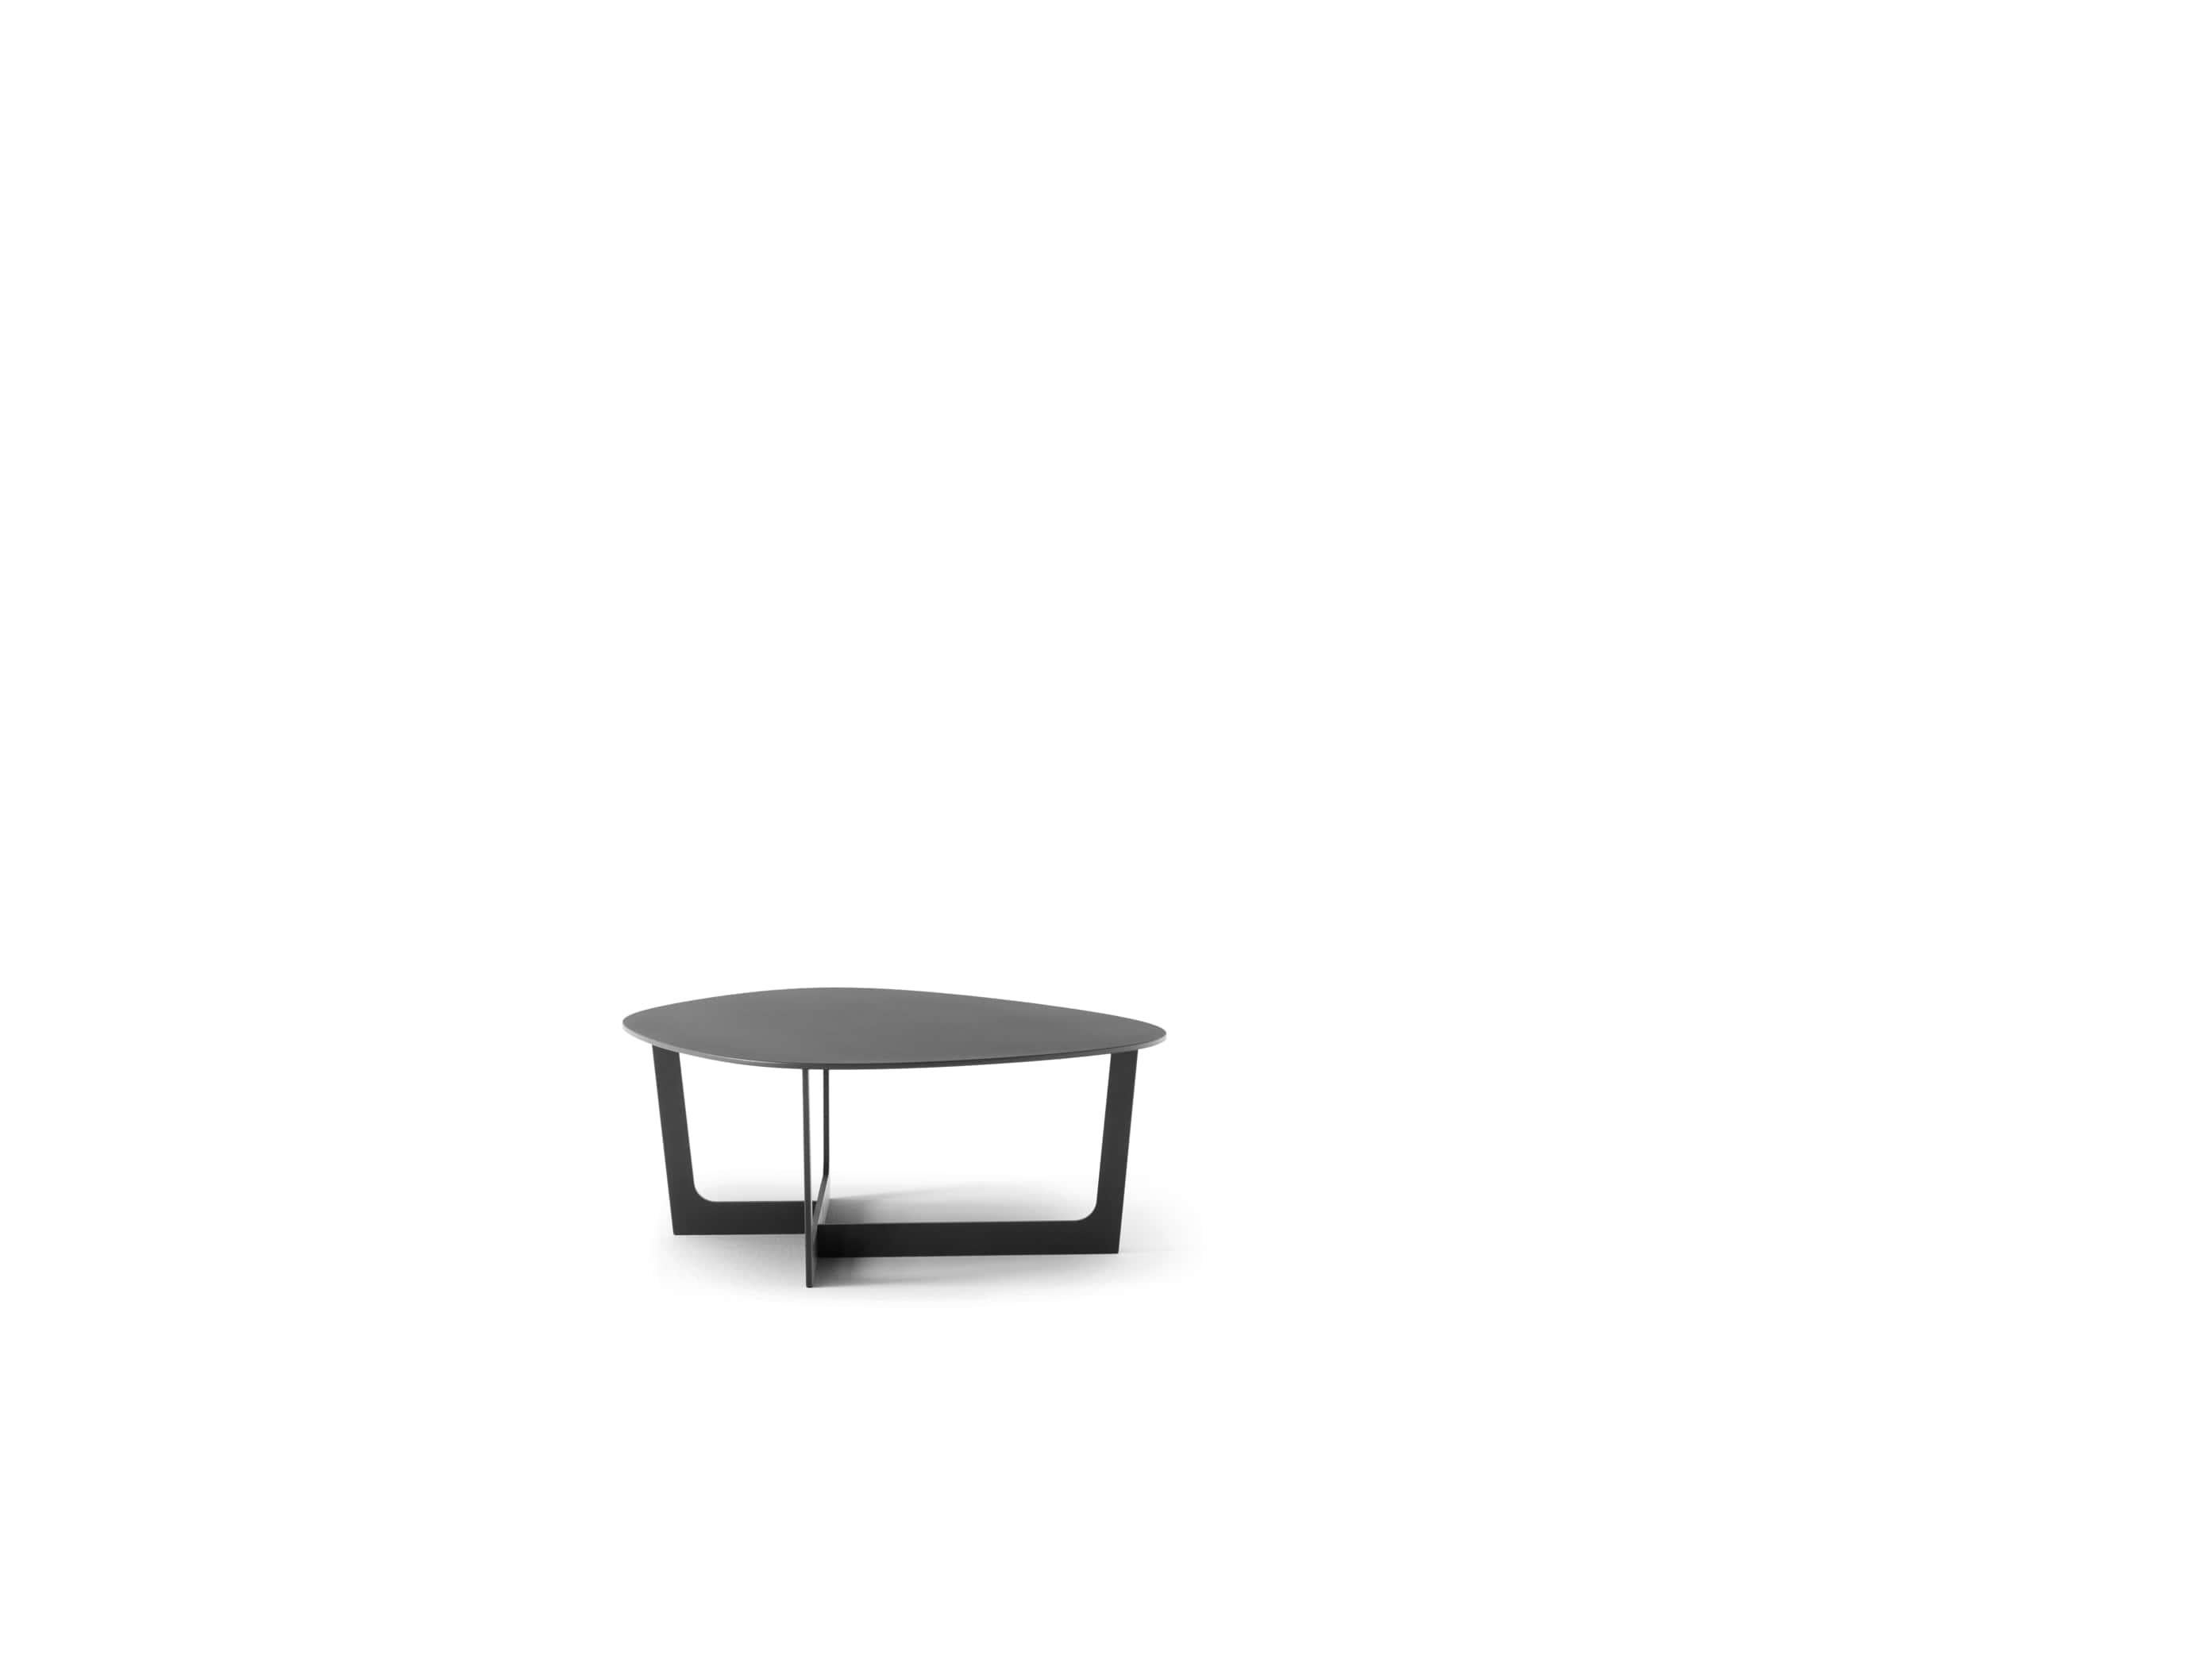 Polish Insula Coffee Table M5190 - Aluminum, textured black lacquered for Fredericia For Sale